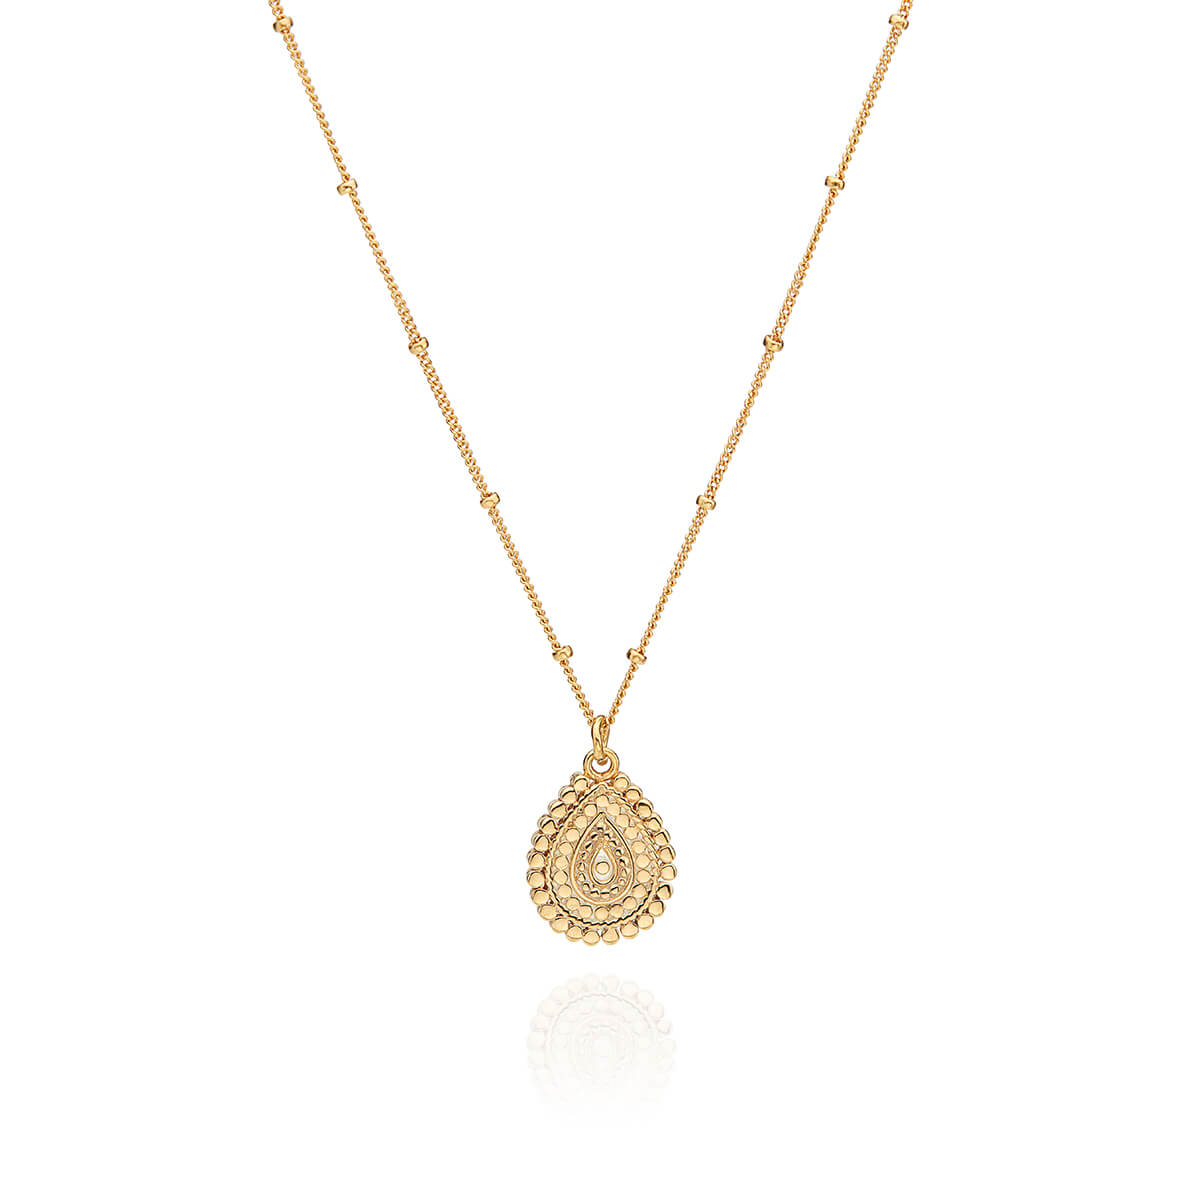 AB 10089 Mosaic scallop teardrop necklace in gold